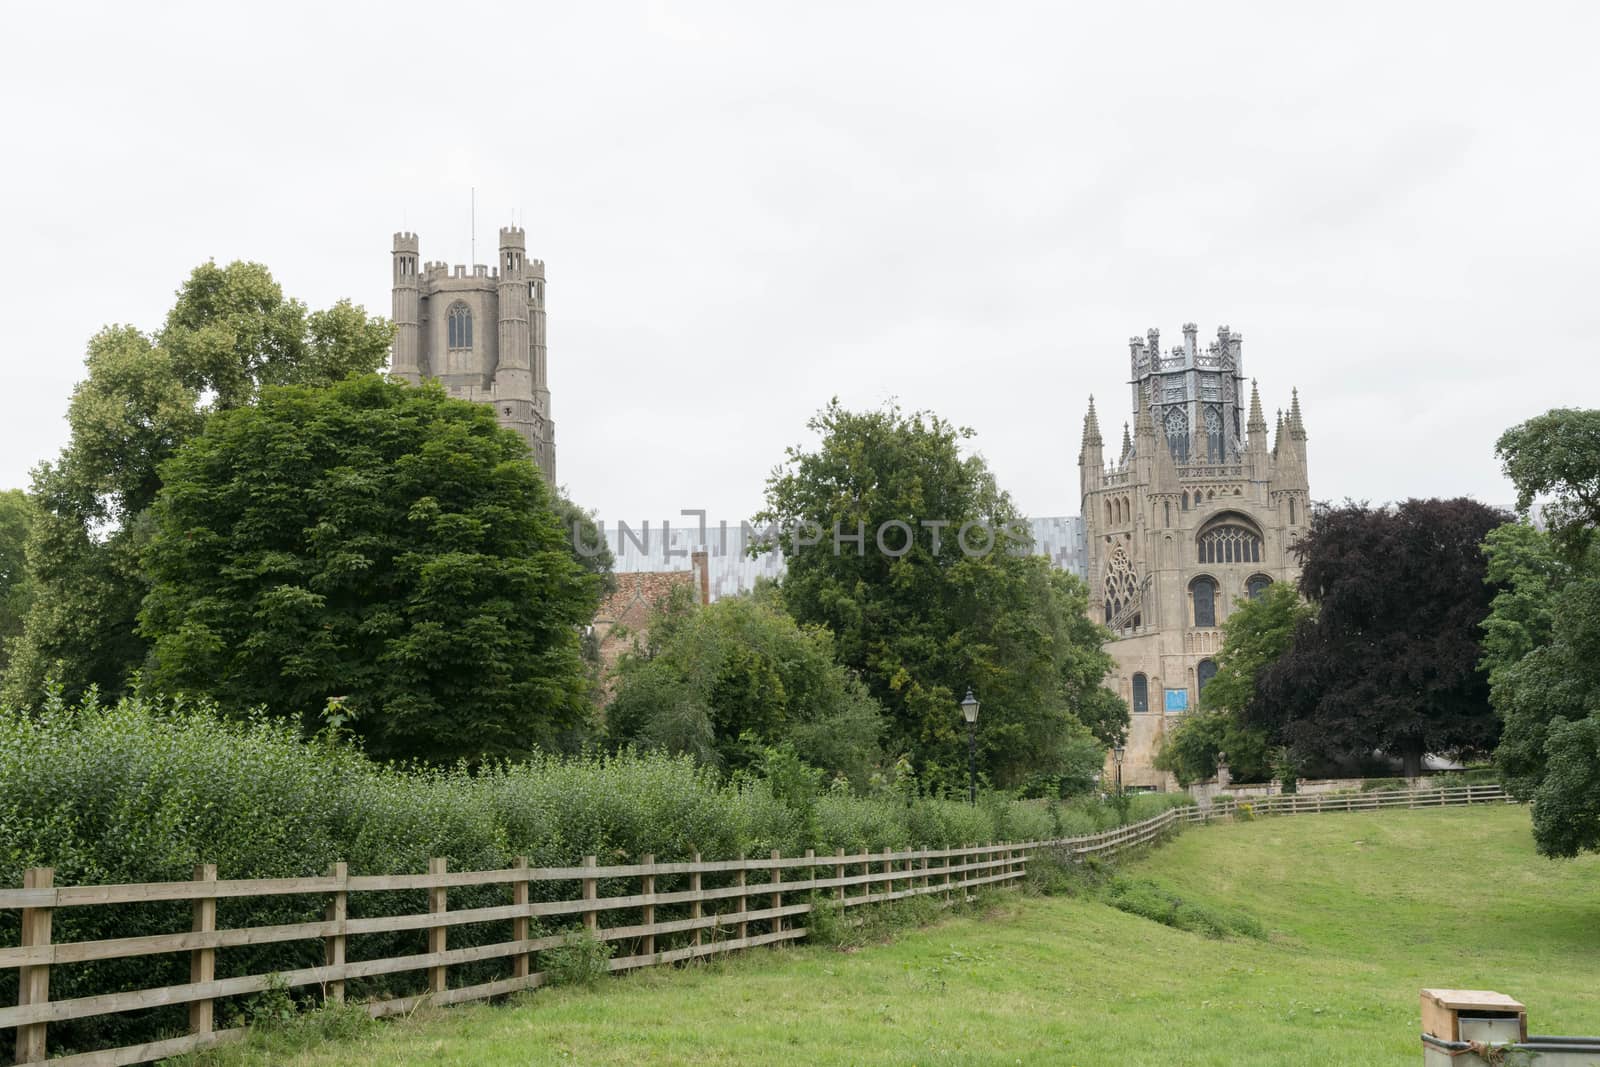 exterior of Ely cathedral by riverheron_photos